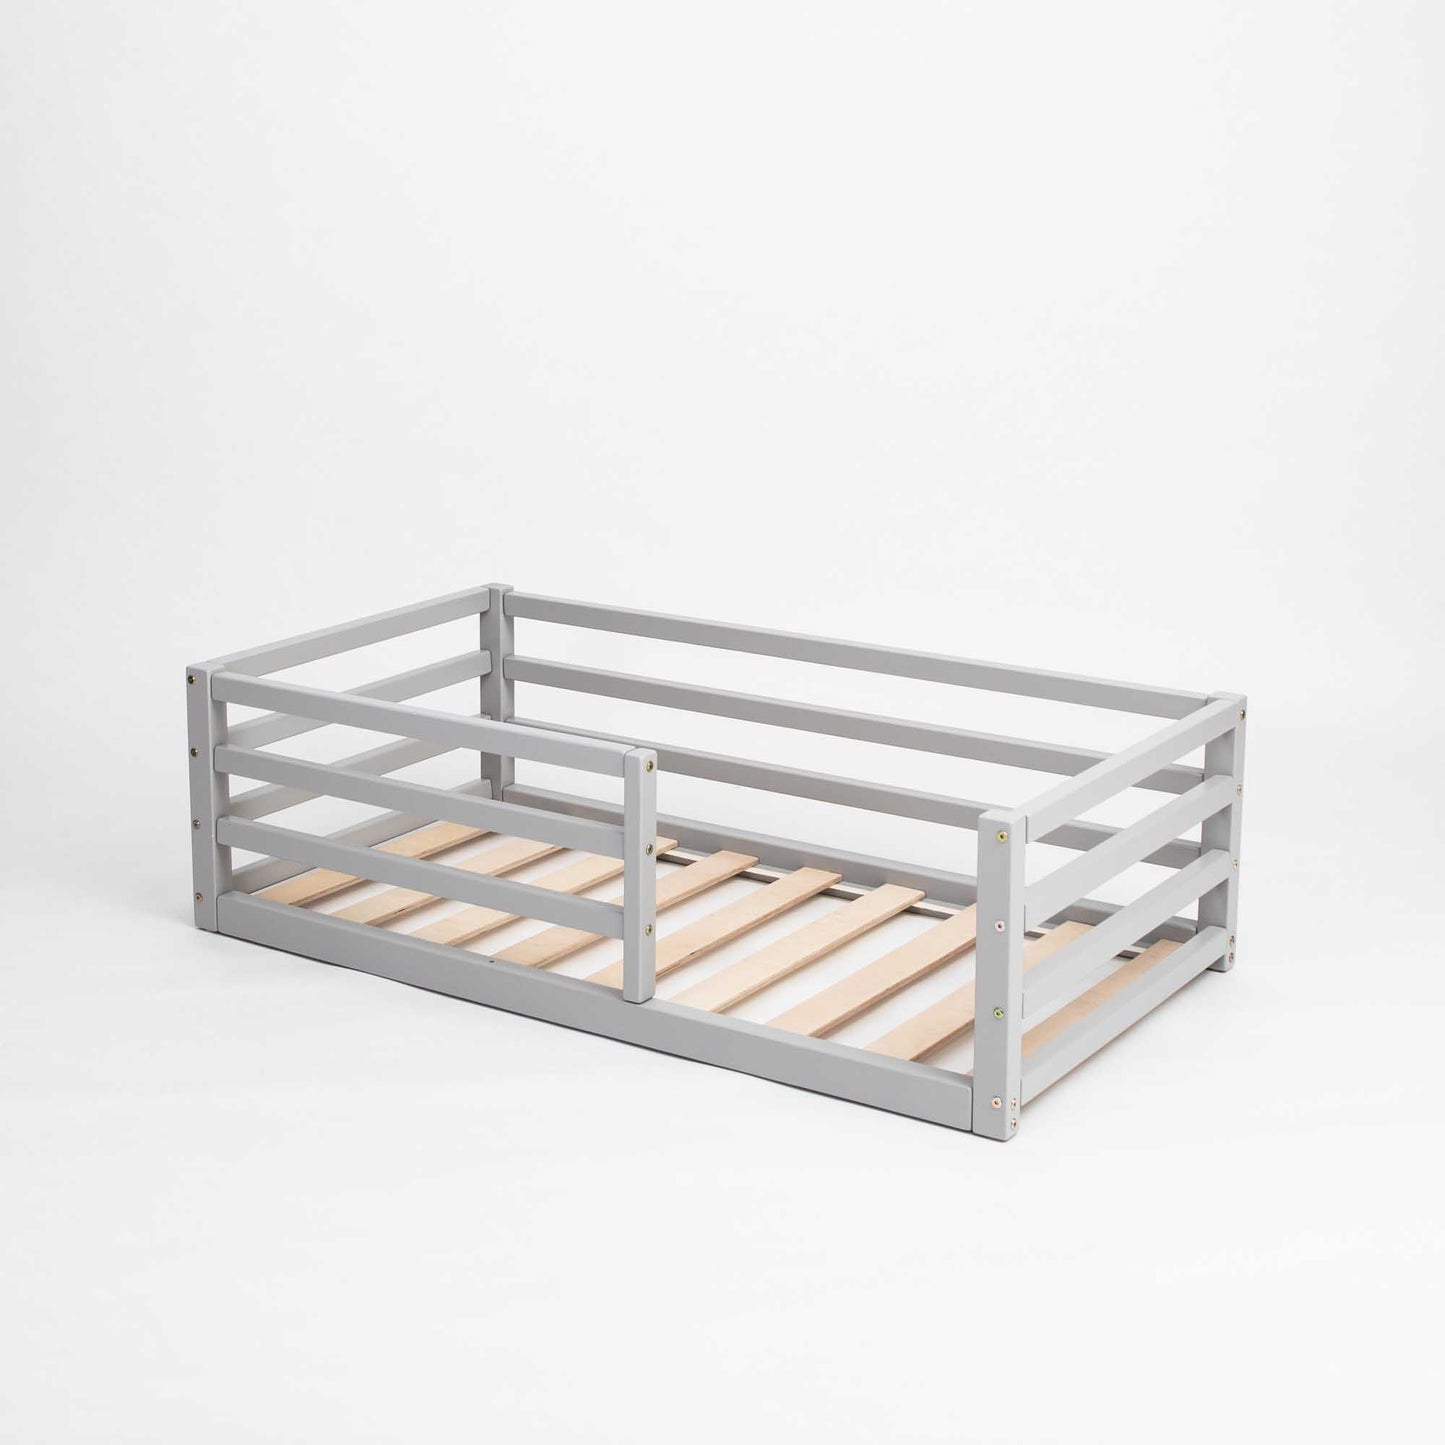 This Sweet Home From Wood floor-level kids' bed with a horizontal rail fence is a transitional piece that encourages independent sleeping with its wooden slats, making it perfect for toddlers.